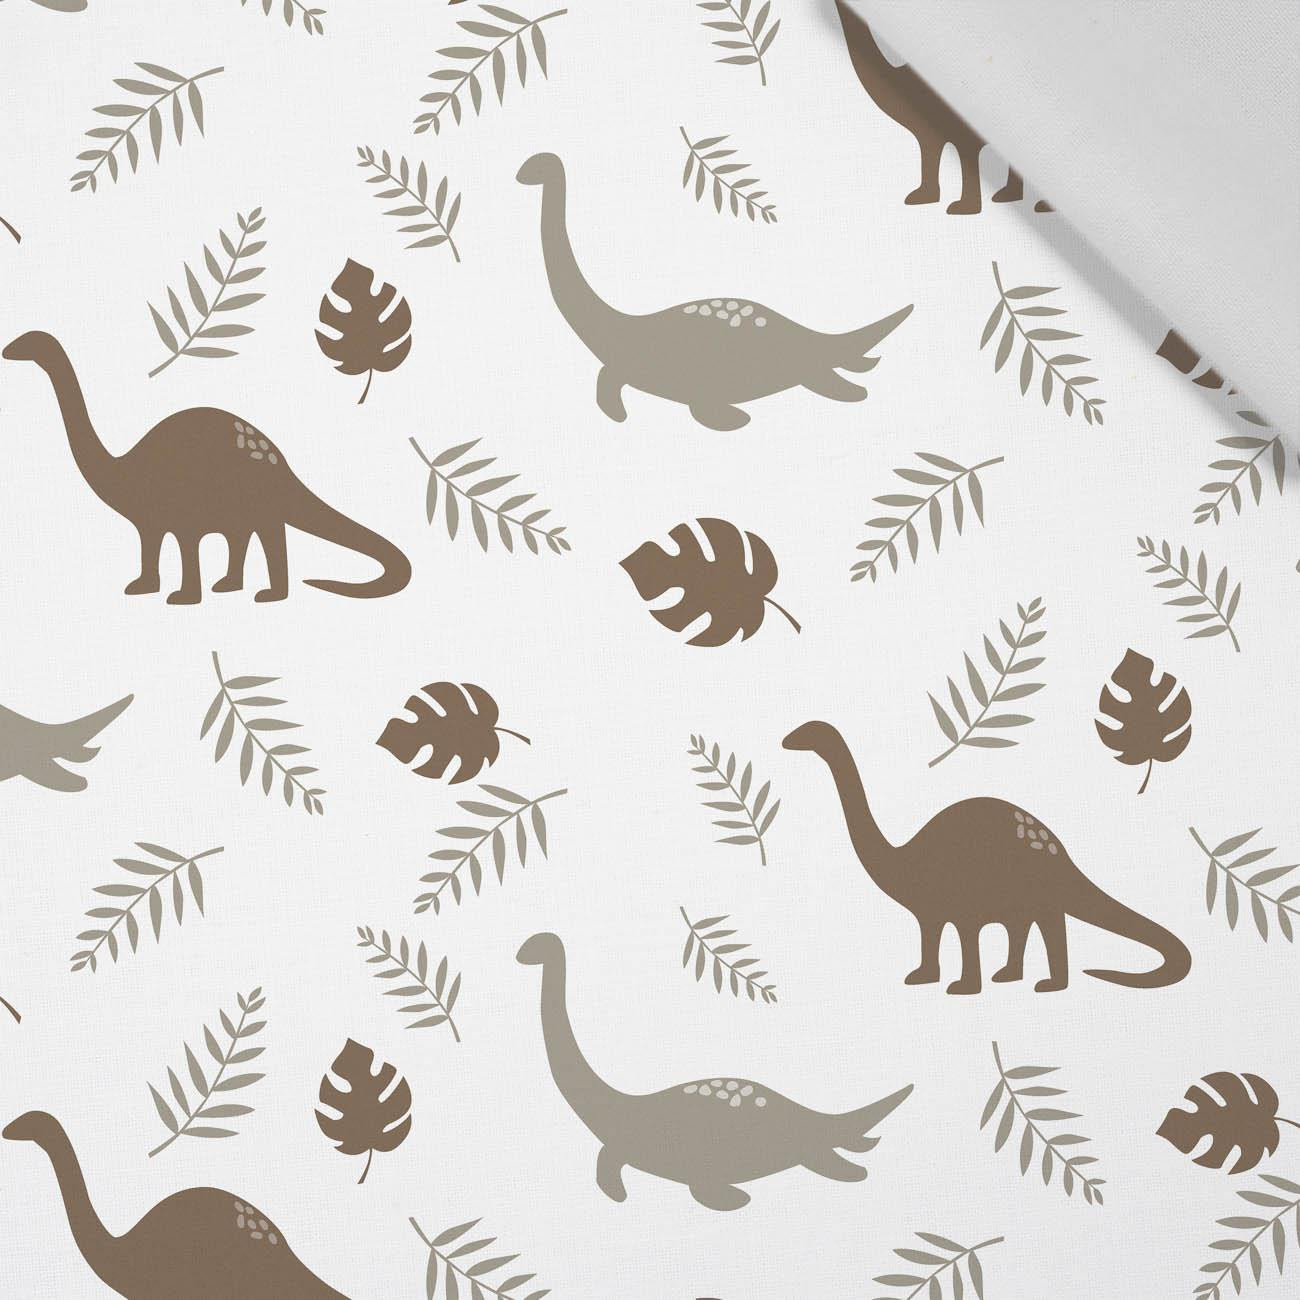 BROWN DINOSAURS PAT. 3 - Cotton woven fabric